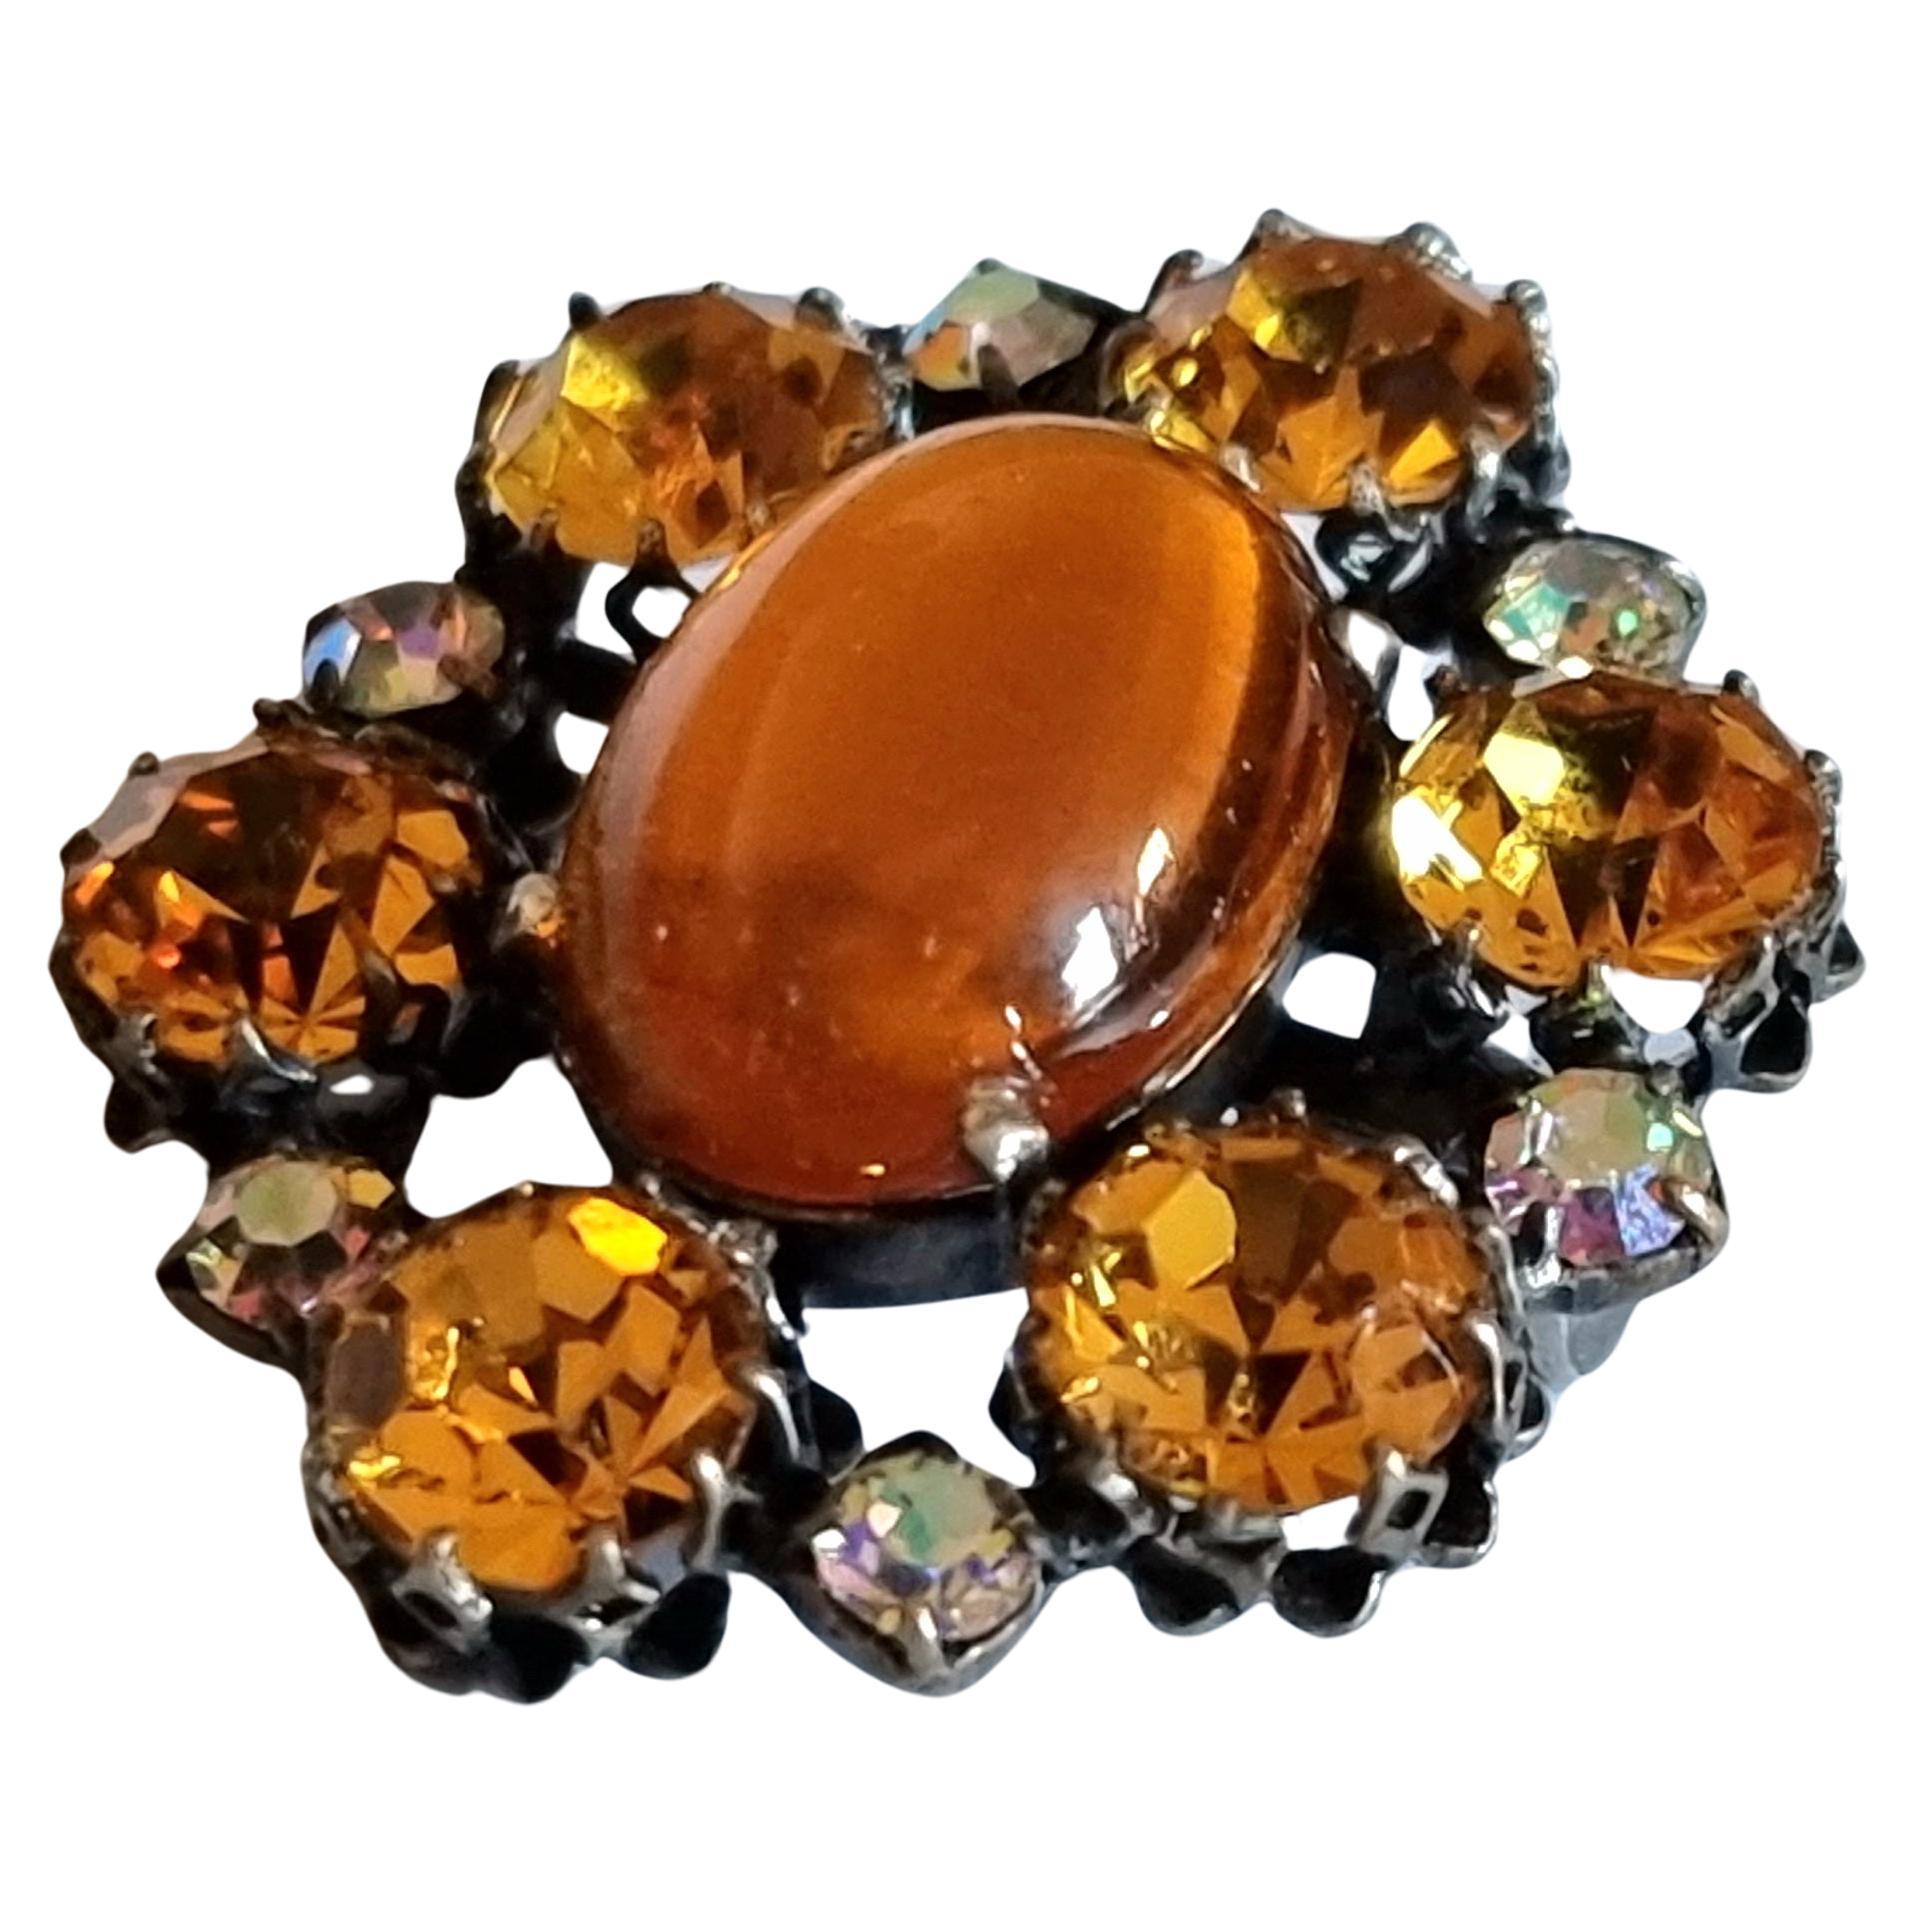 CIS countess Cissy ZOLTOWSKA, Magnificent old BROOCH, vintage 50s, High Fashion For Sale